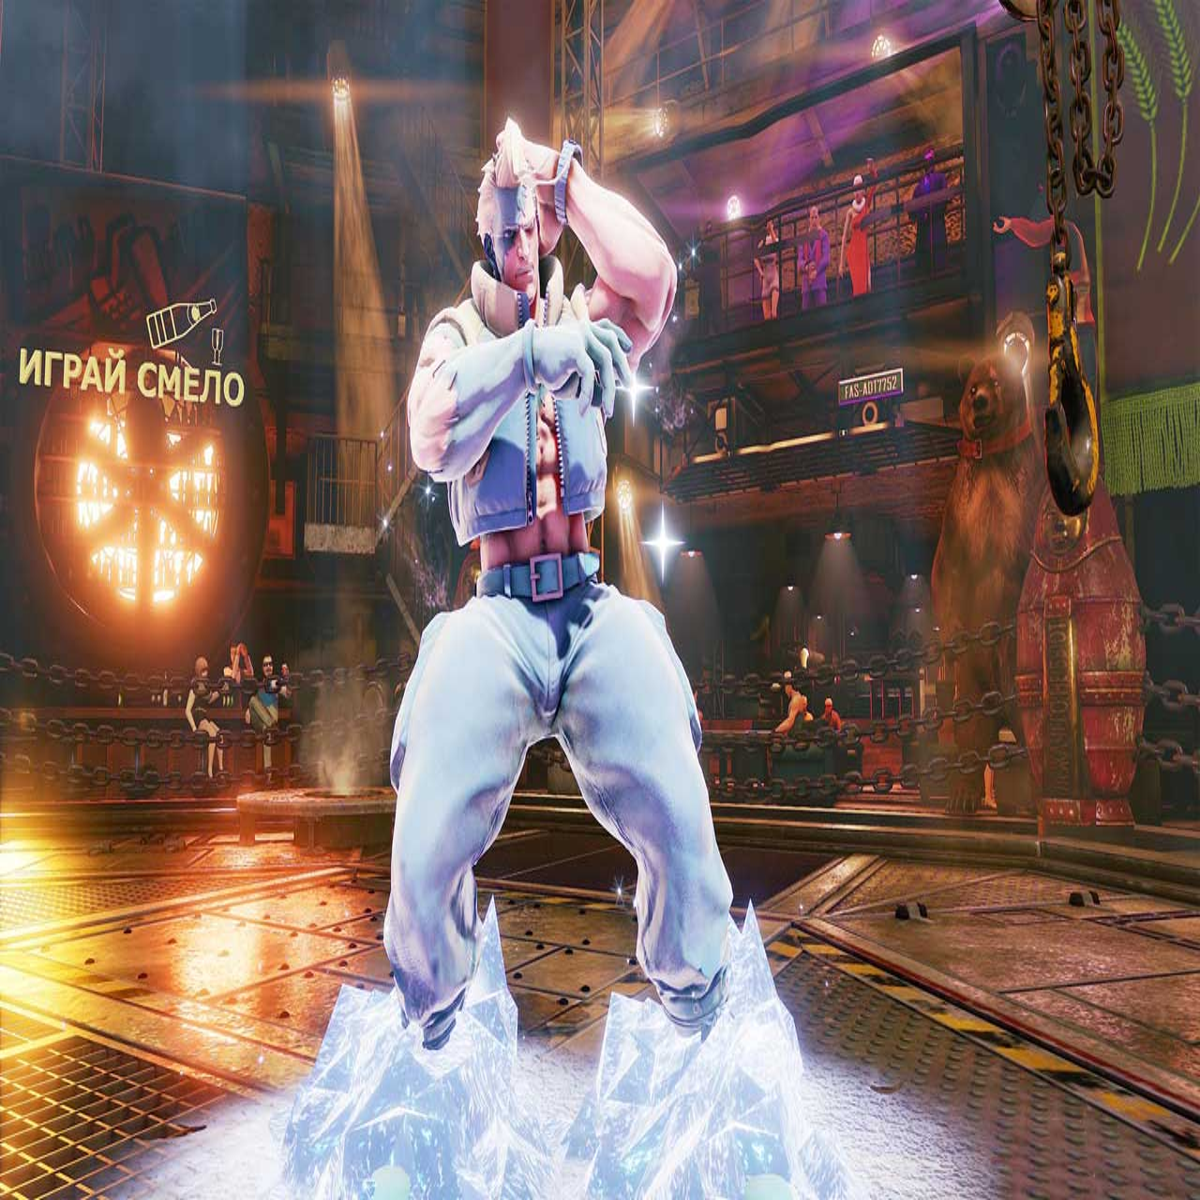 Capcom Teases New Street Fighter V Characters